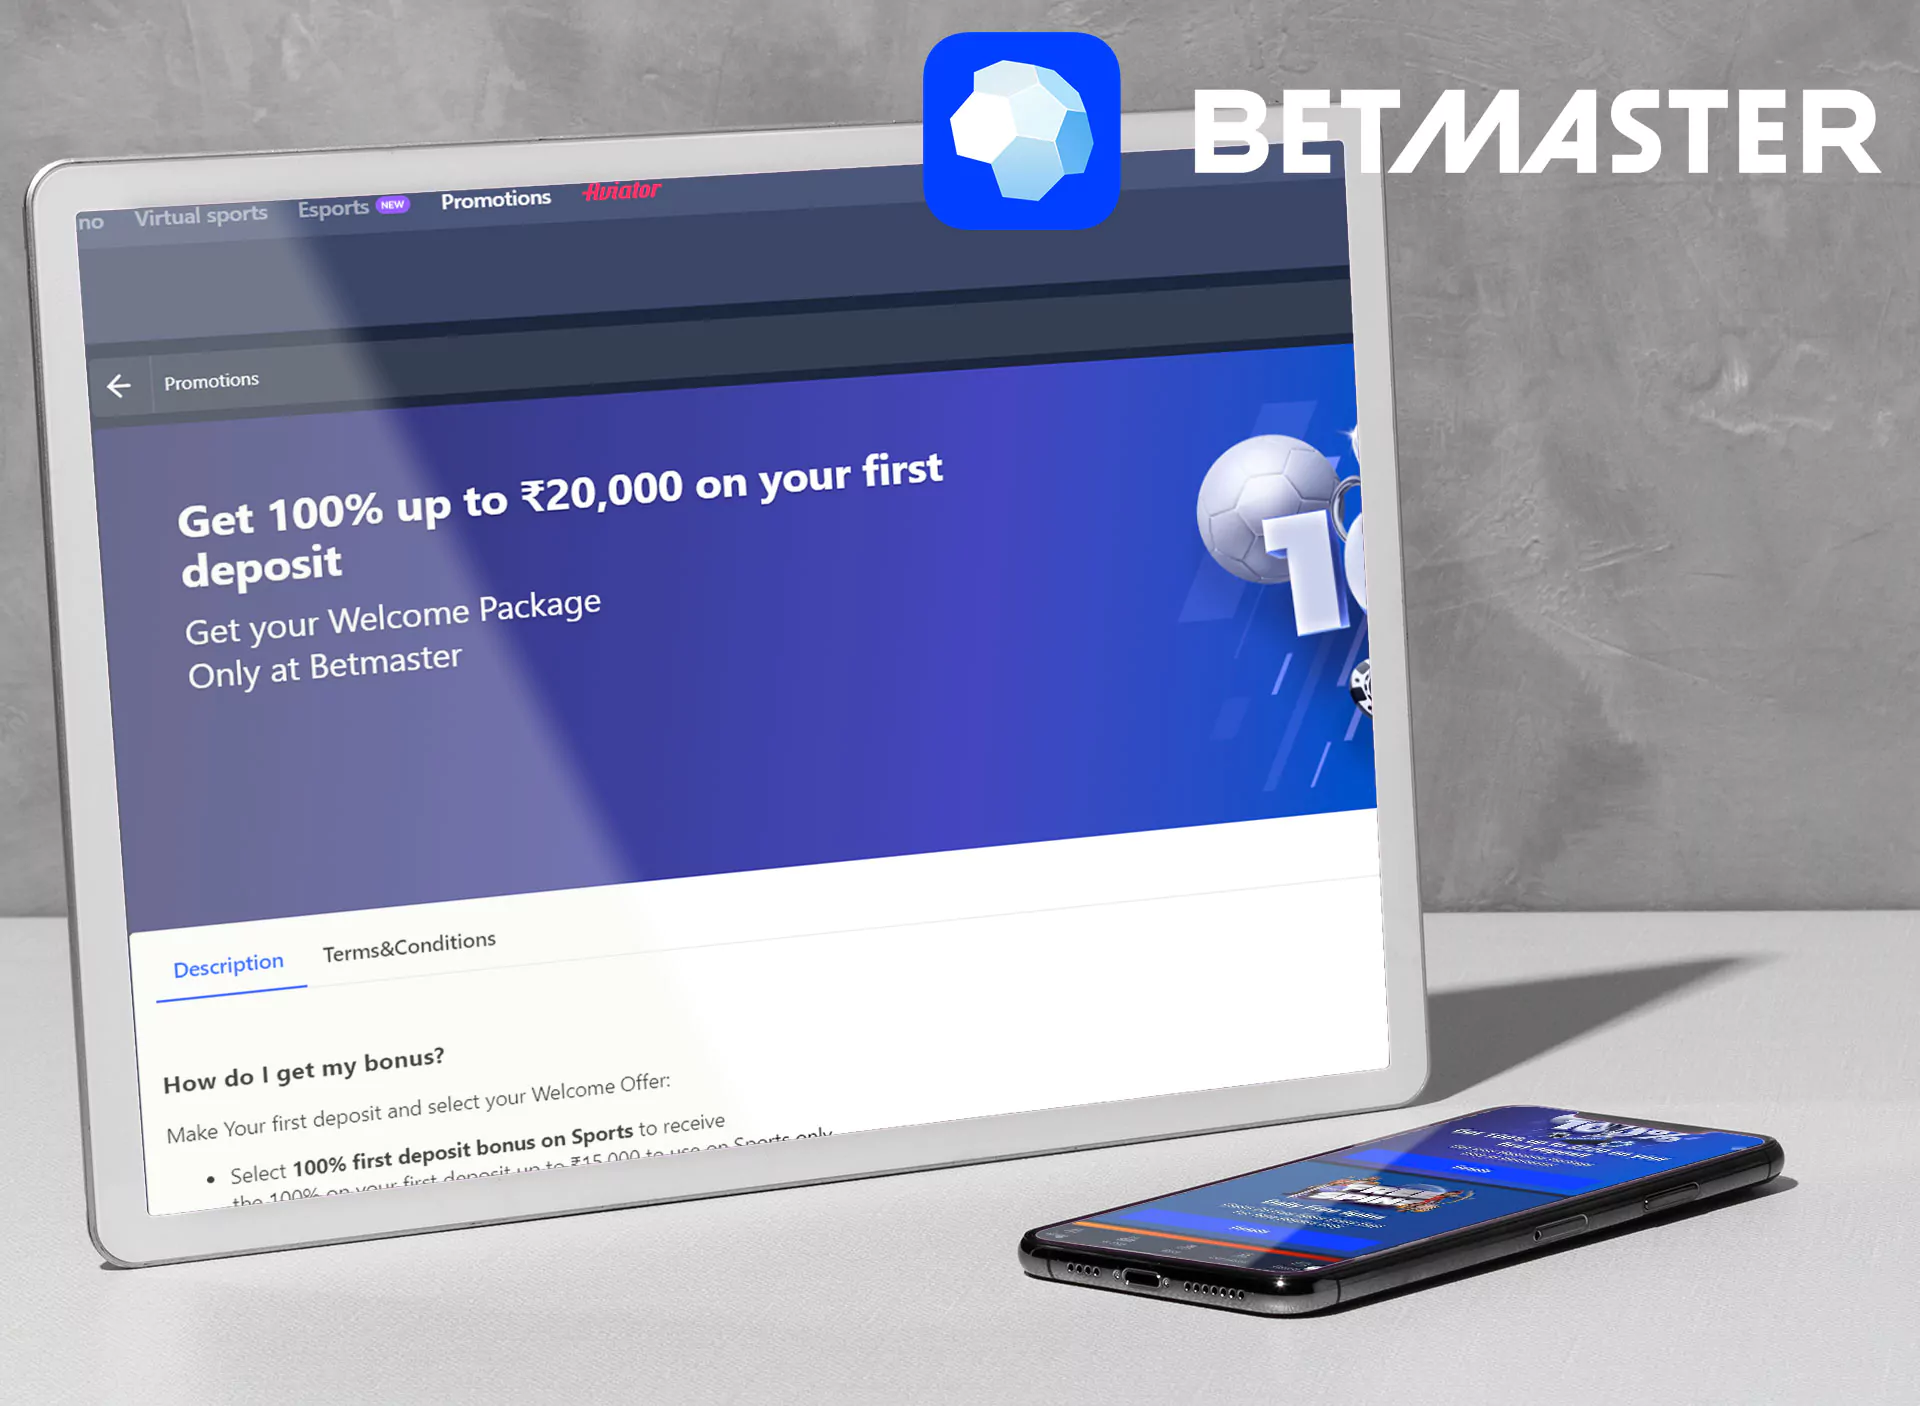 Right after the first deposit you can geta a welcome bonus from Betmaster.